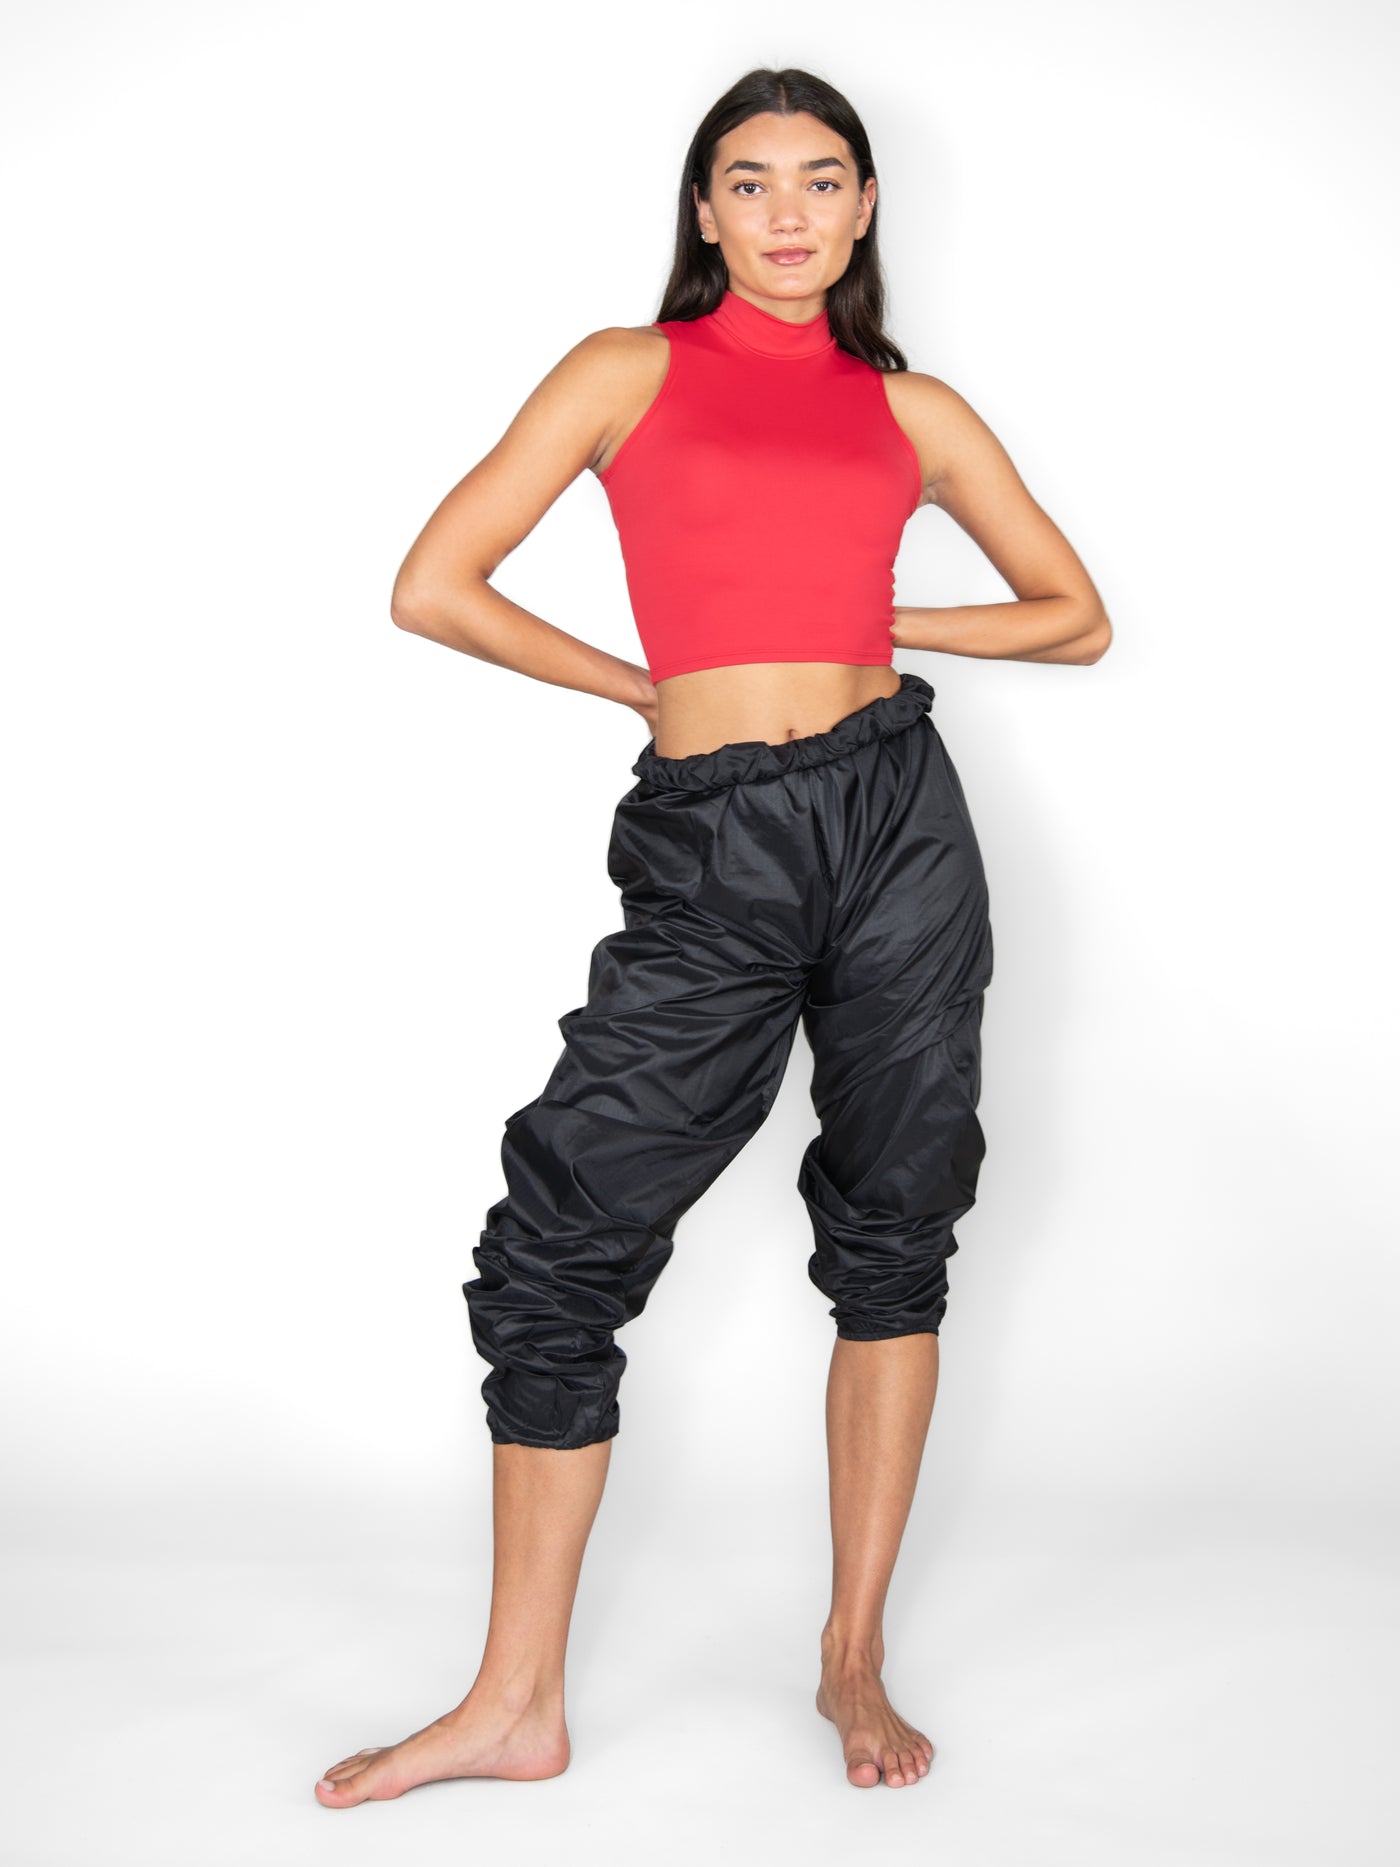 Girls dance pants by Grand Prix clothes style FDP02Dx Kids/Black/Nude